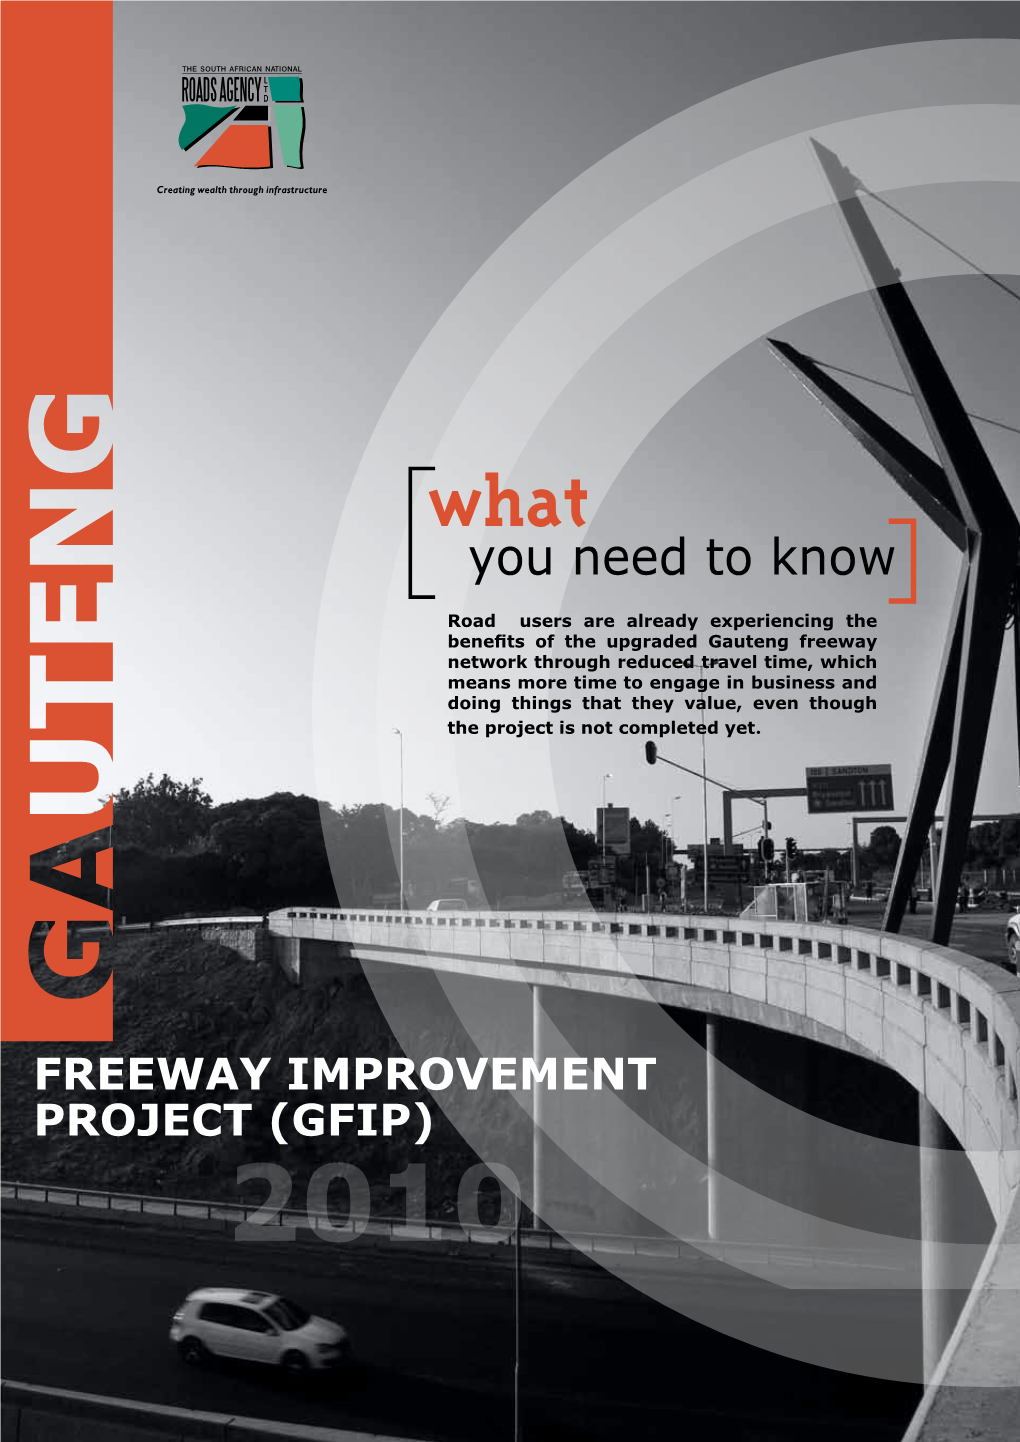 FREEWAY IMPROVEMENT PROJECT (GFIP) 2010 Background of the Project